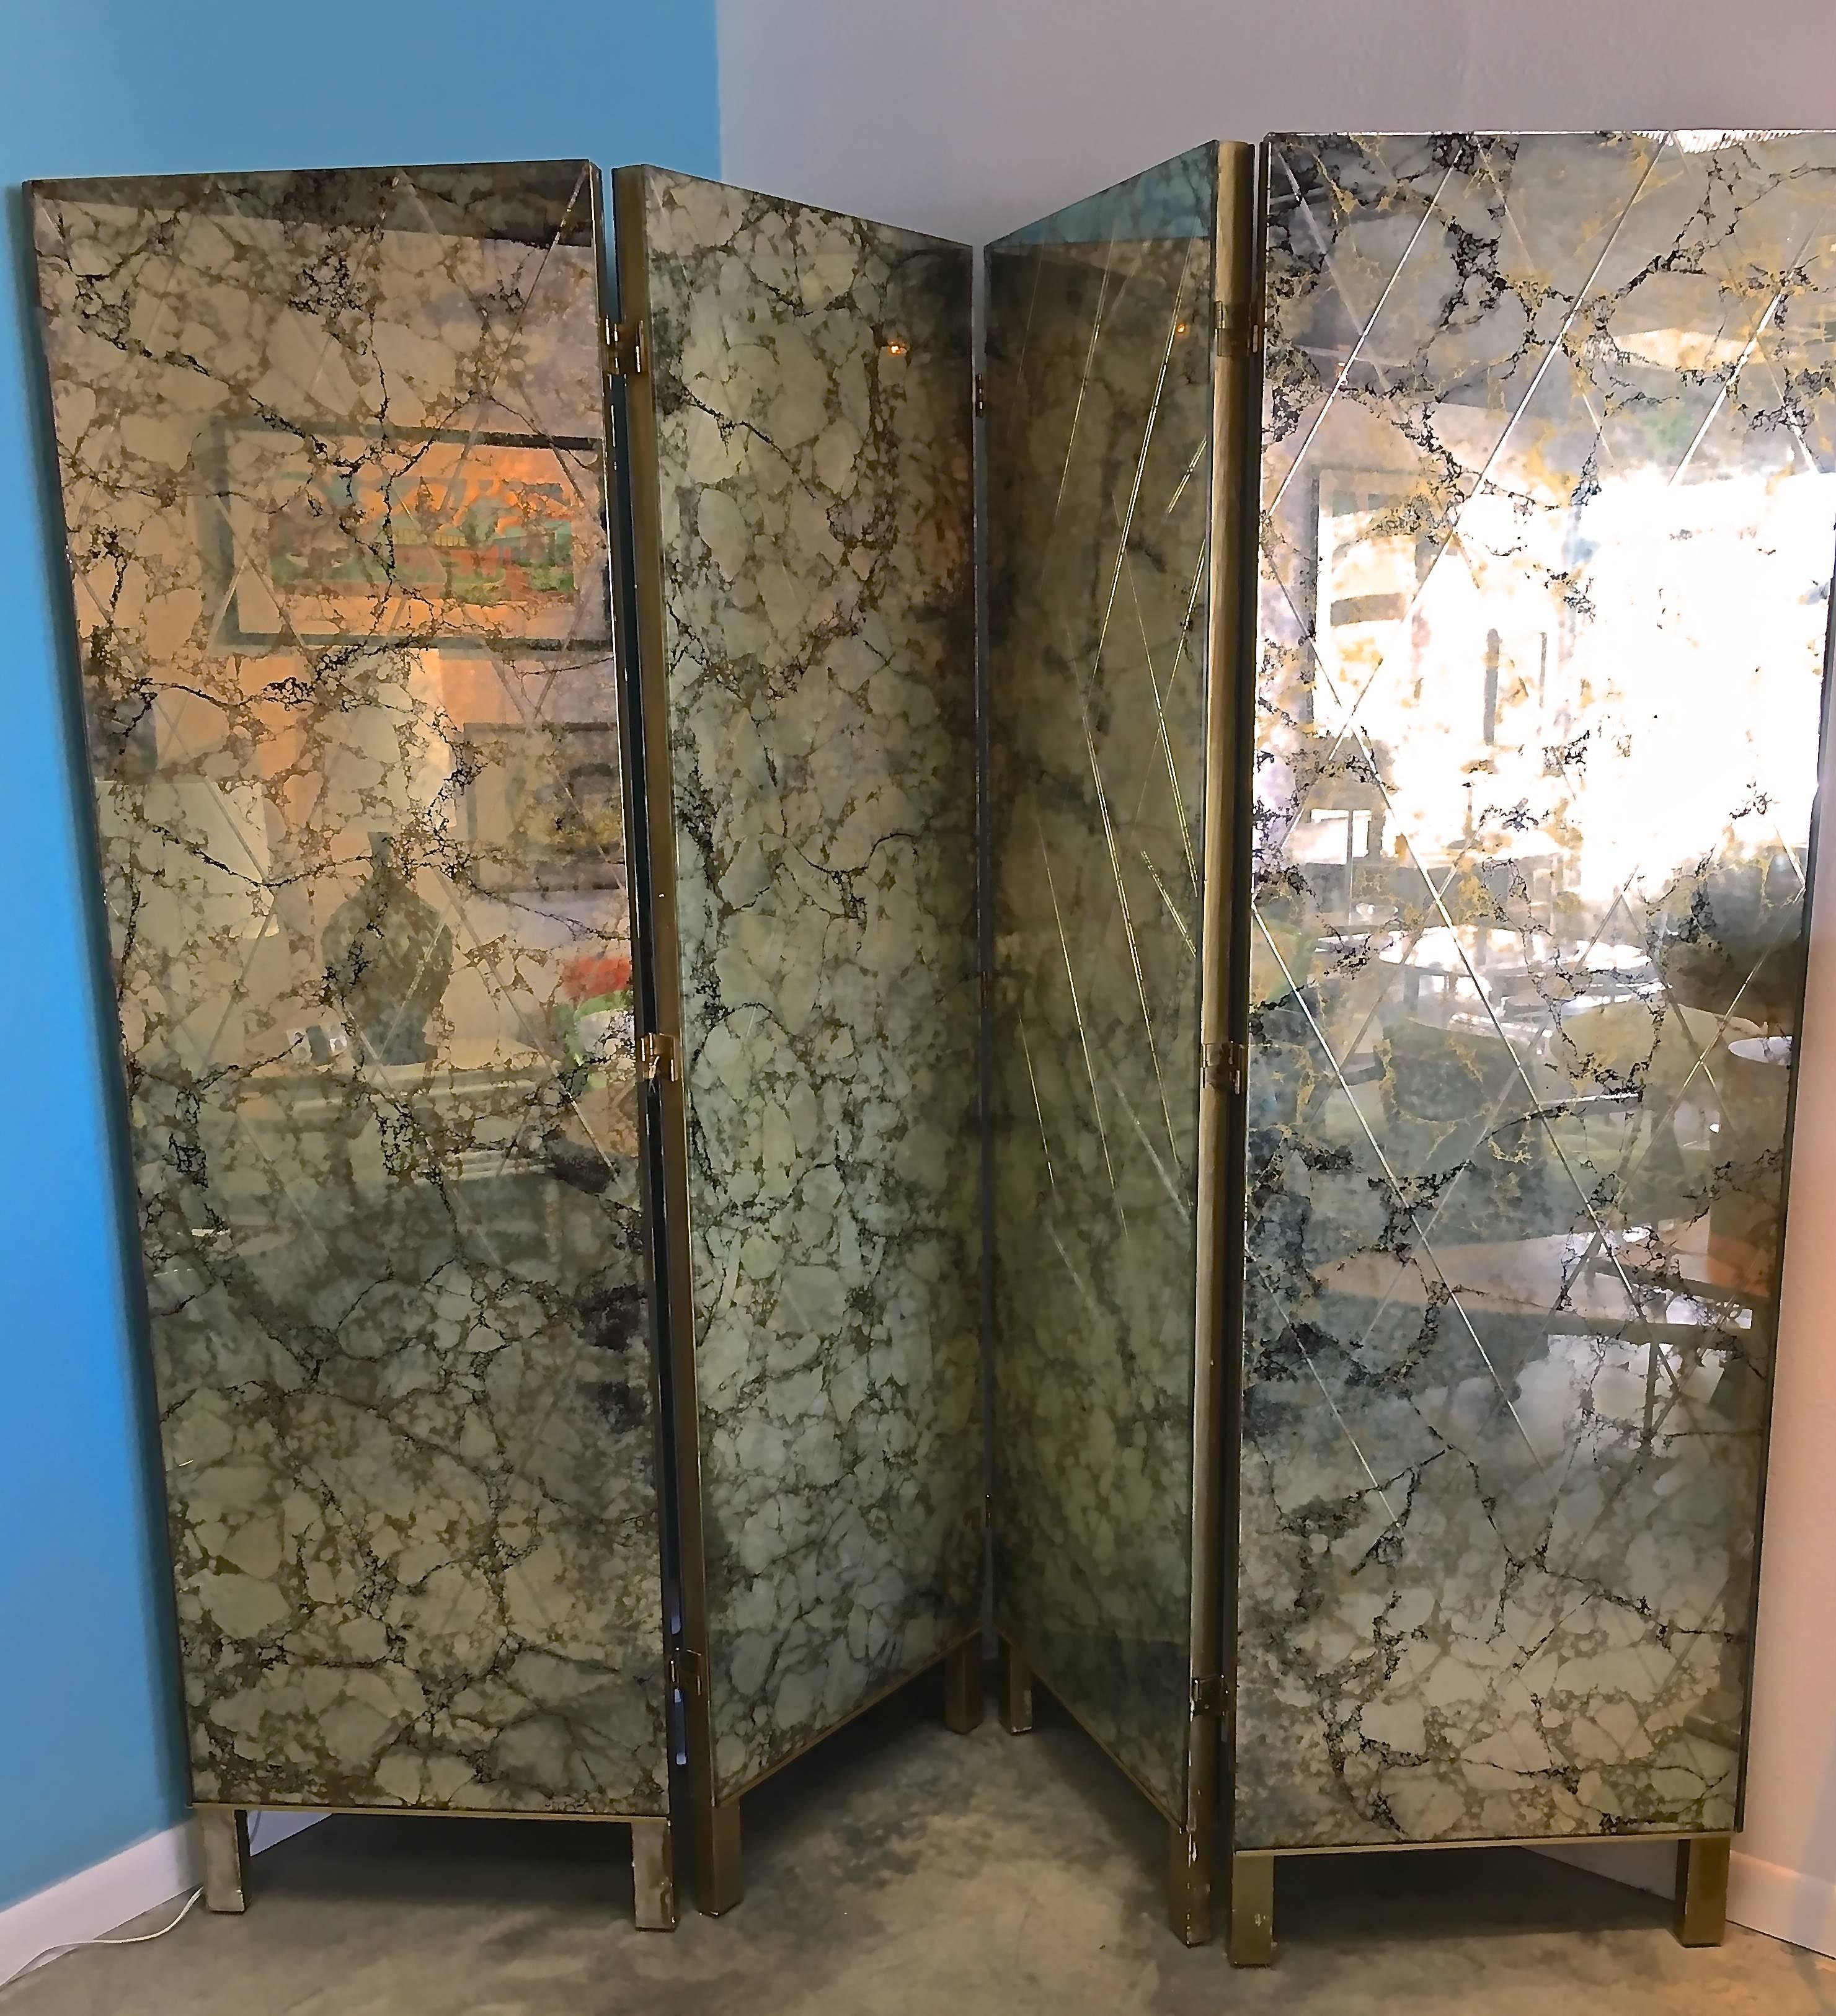 Four-panel double-sided mirrored screen of exquisite depth, with gold and black veining on a silver and smoke antiqued ground. Each side features a harlequin pattern etched into the glass panels. Mirror is mounted on solid wood panels with